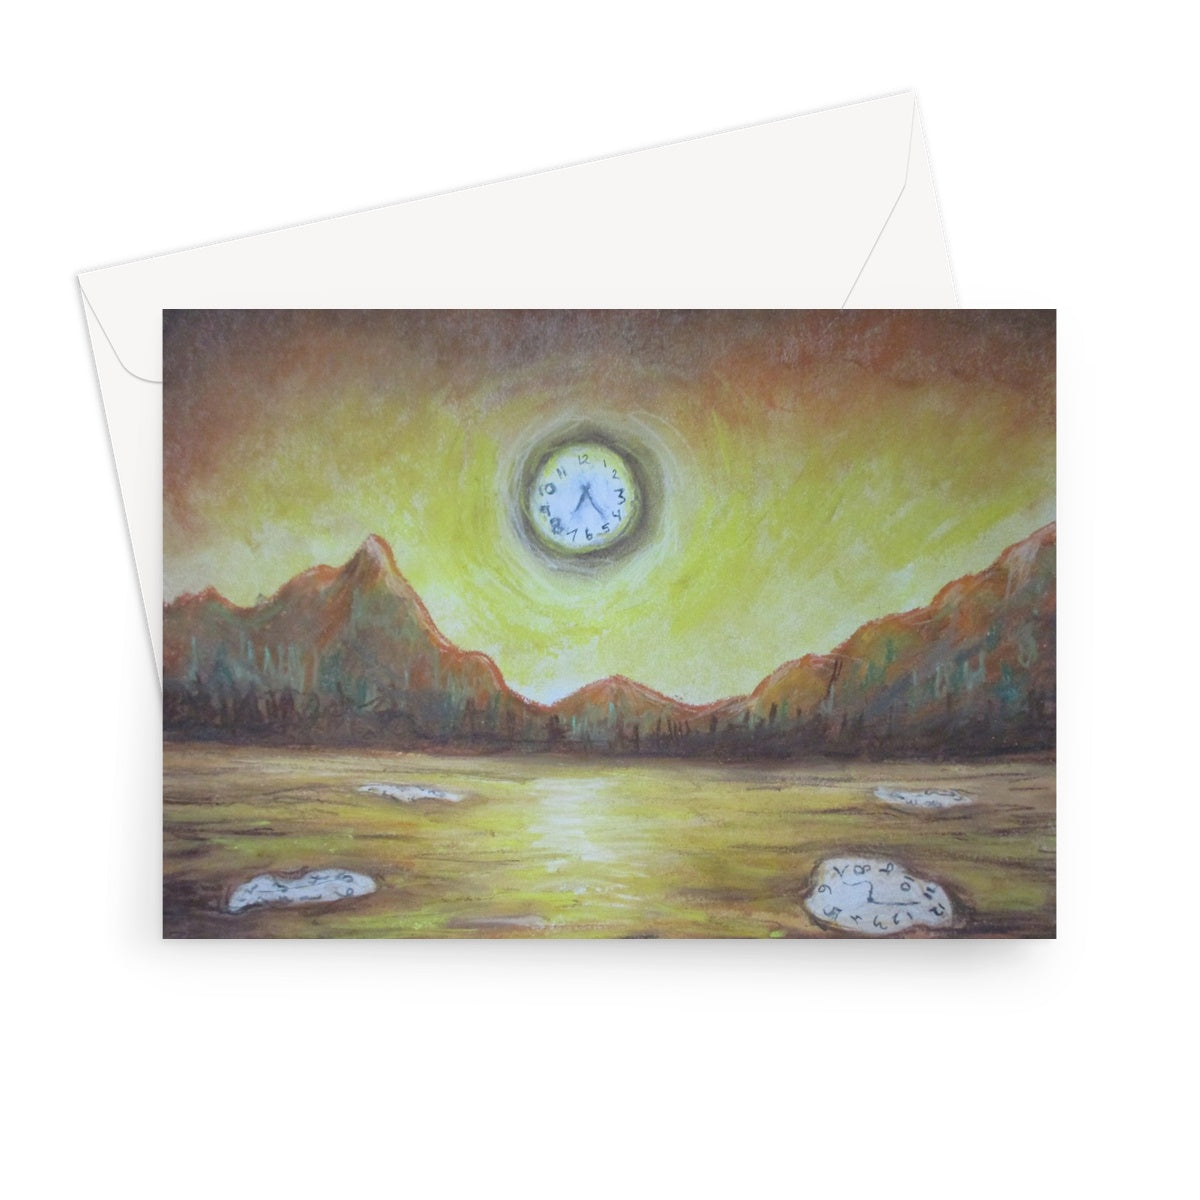 Poet and her Soul Speaking Paintings ~ prints, originals and more  Stroke of the hour In each little bit Painting a sky flower Pressing in each little grit  Original Artwork and Poetry of Artist Jen Shearer  This is a original soft pastel painting printed on product.